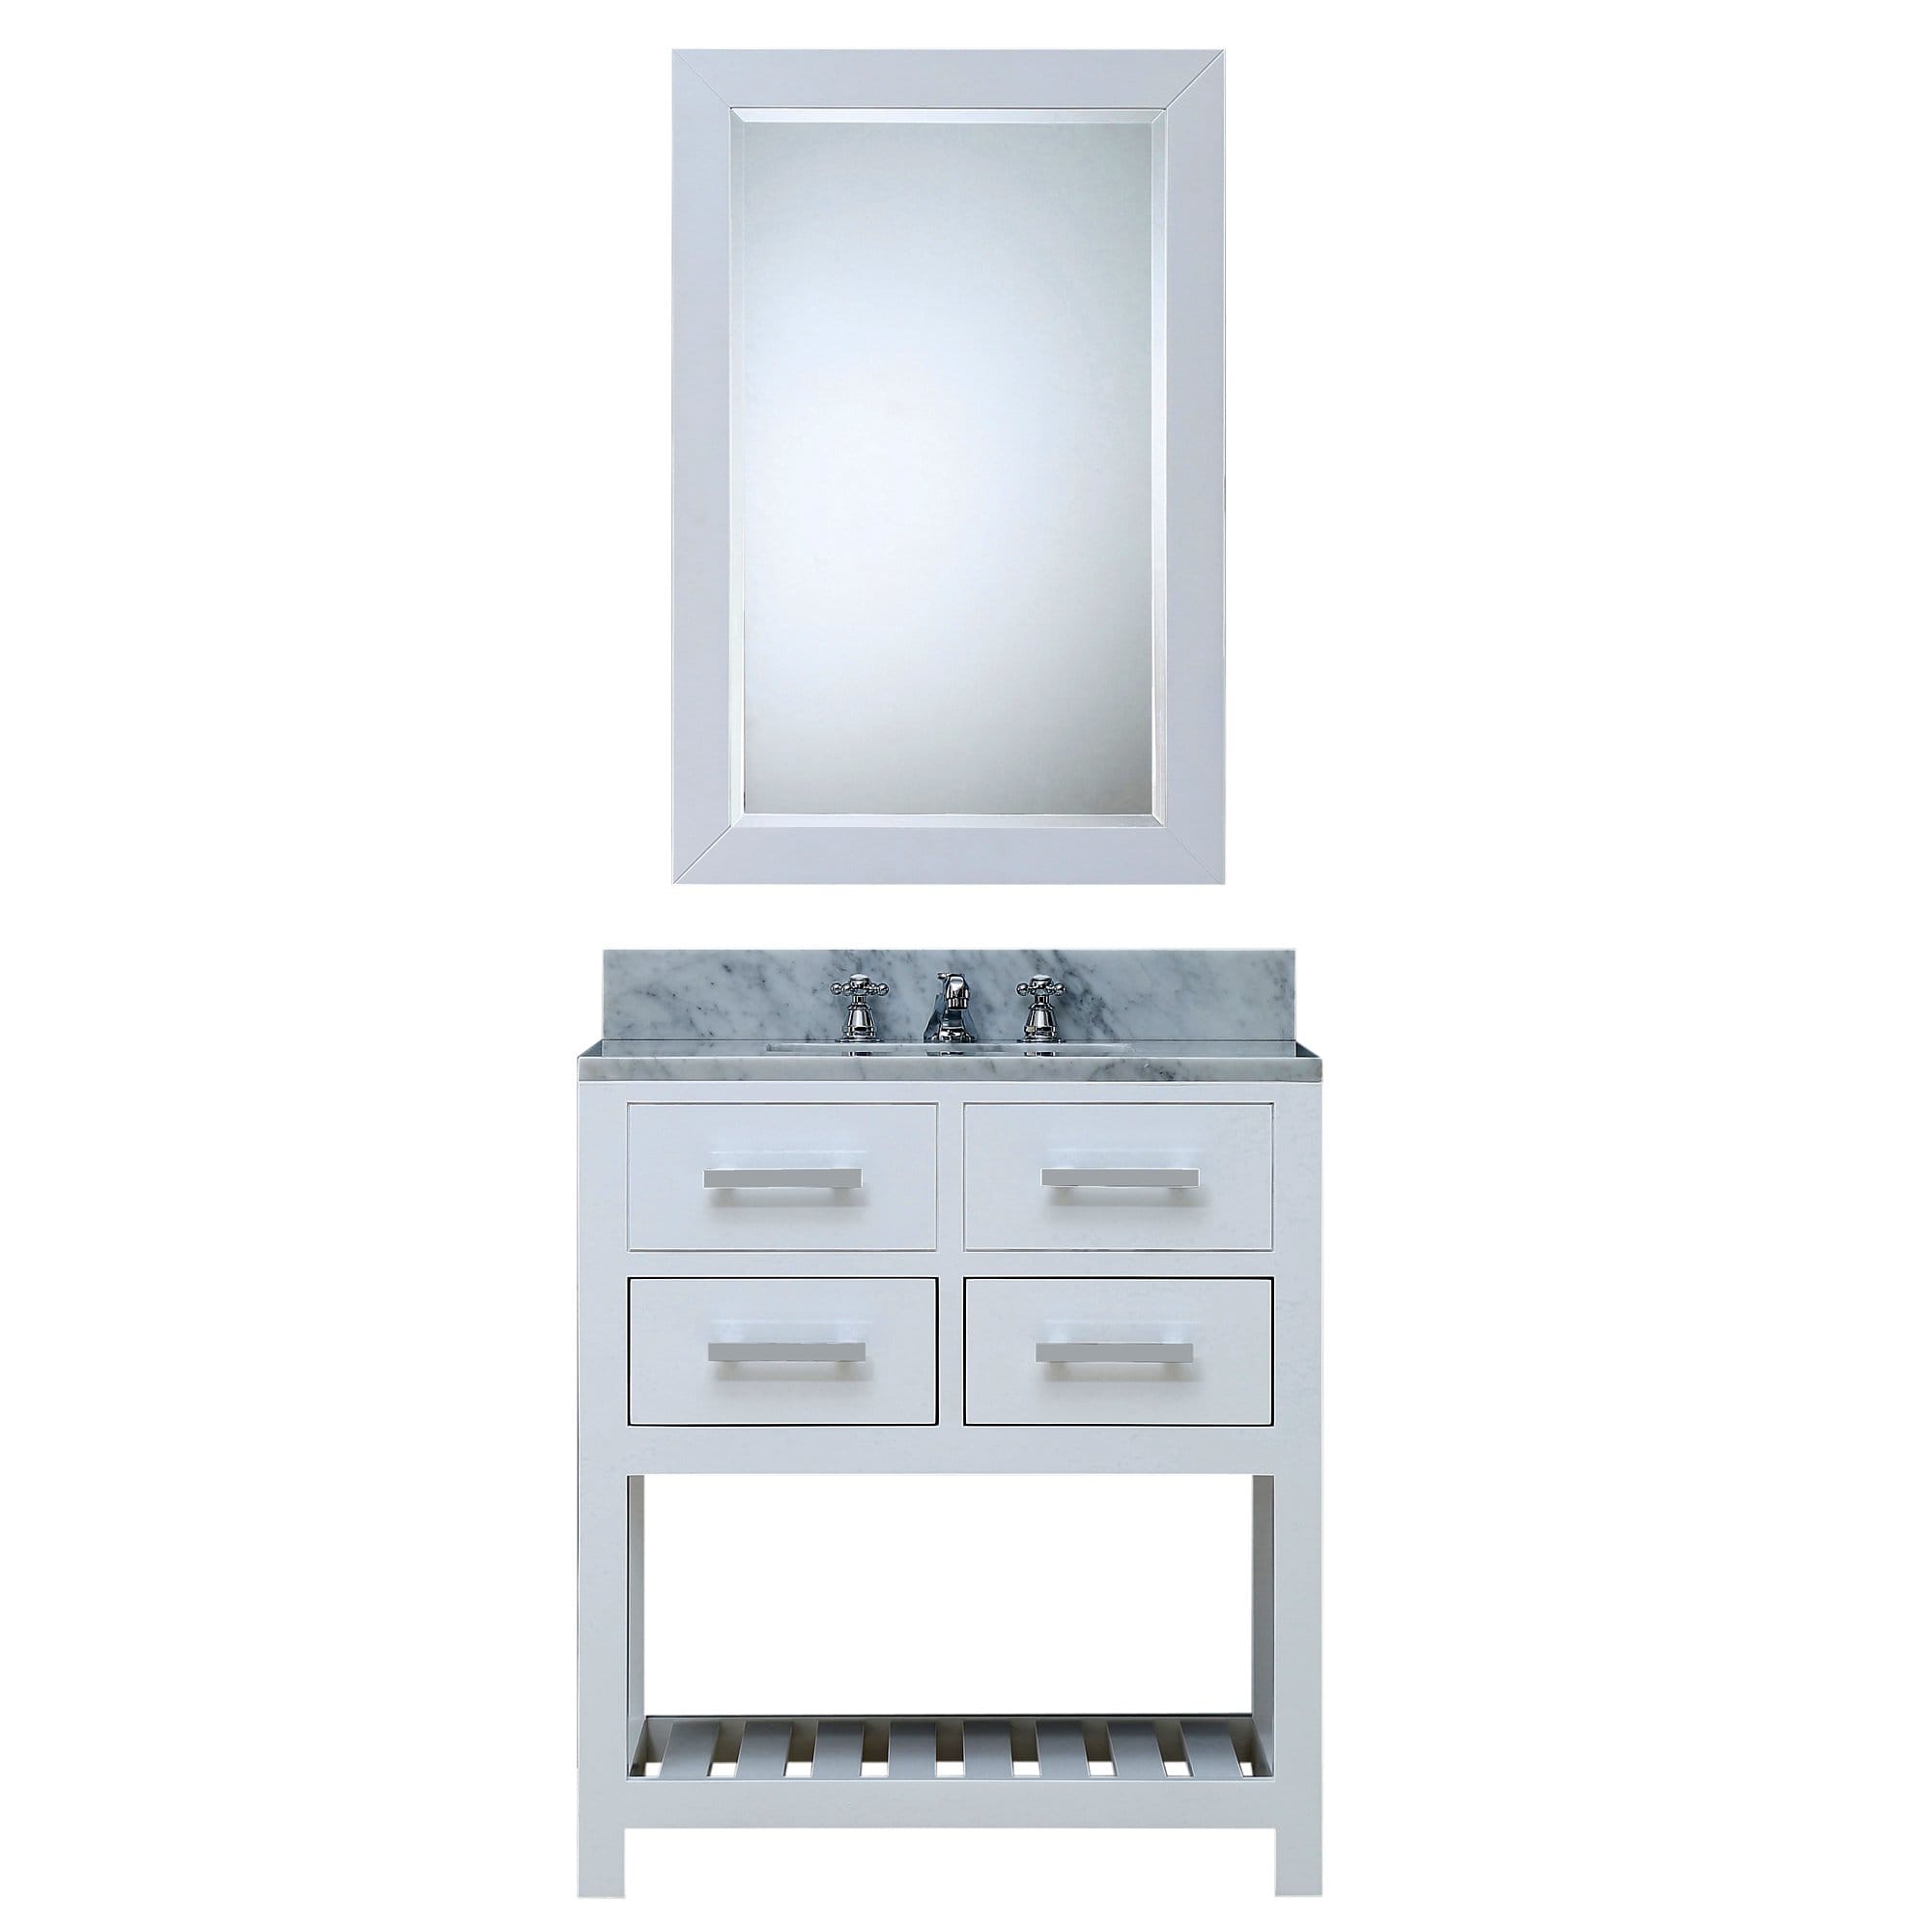 Water Creation 30 Inch Pure White Single Sink Bathroom Vanity With Matching Framed Mirror From The Madalyn Collection - Molaix700621682486Bathroom vanityMA30CW01PW-R24000000